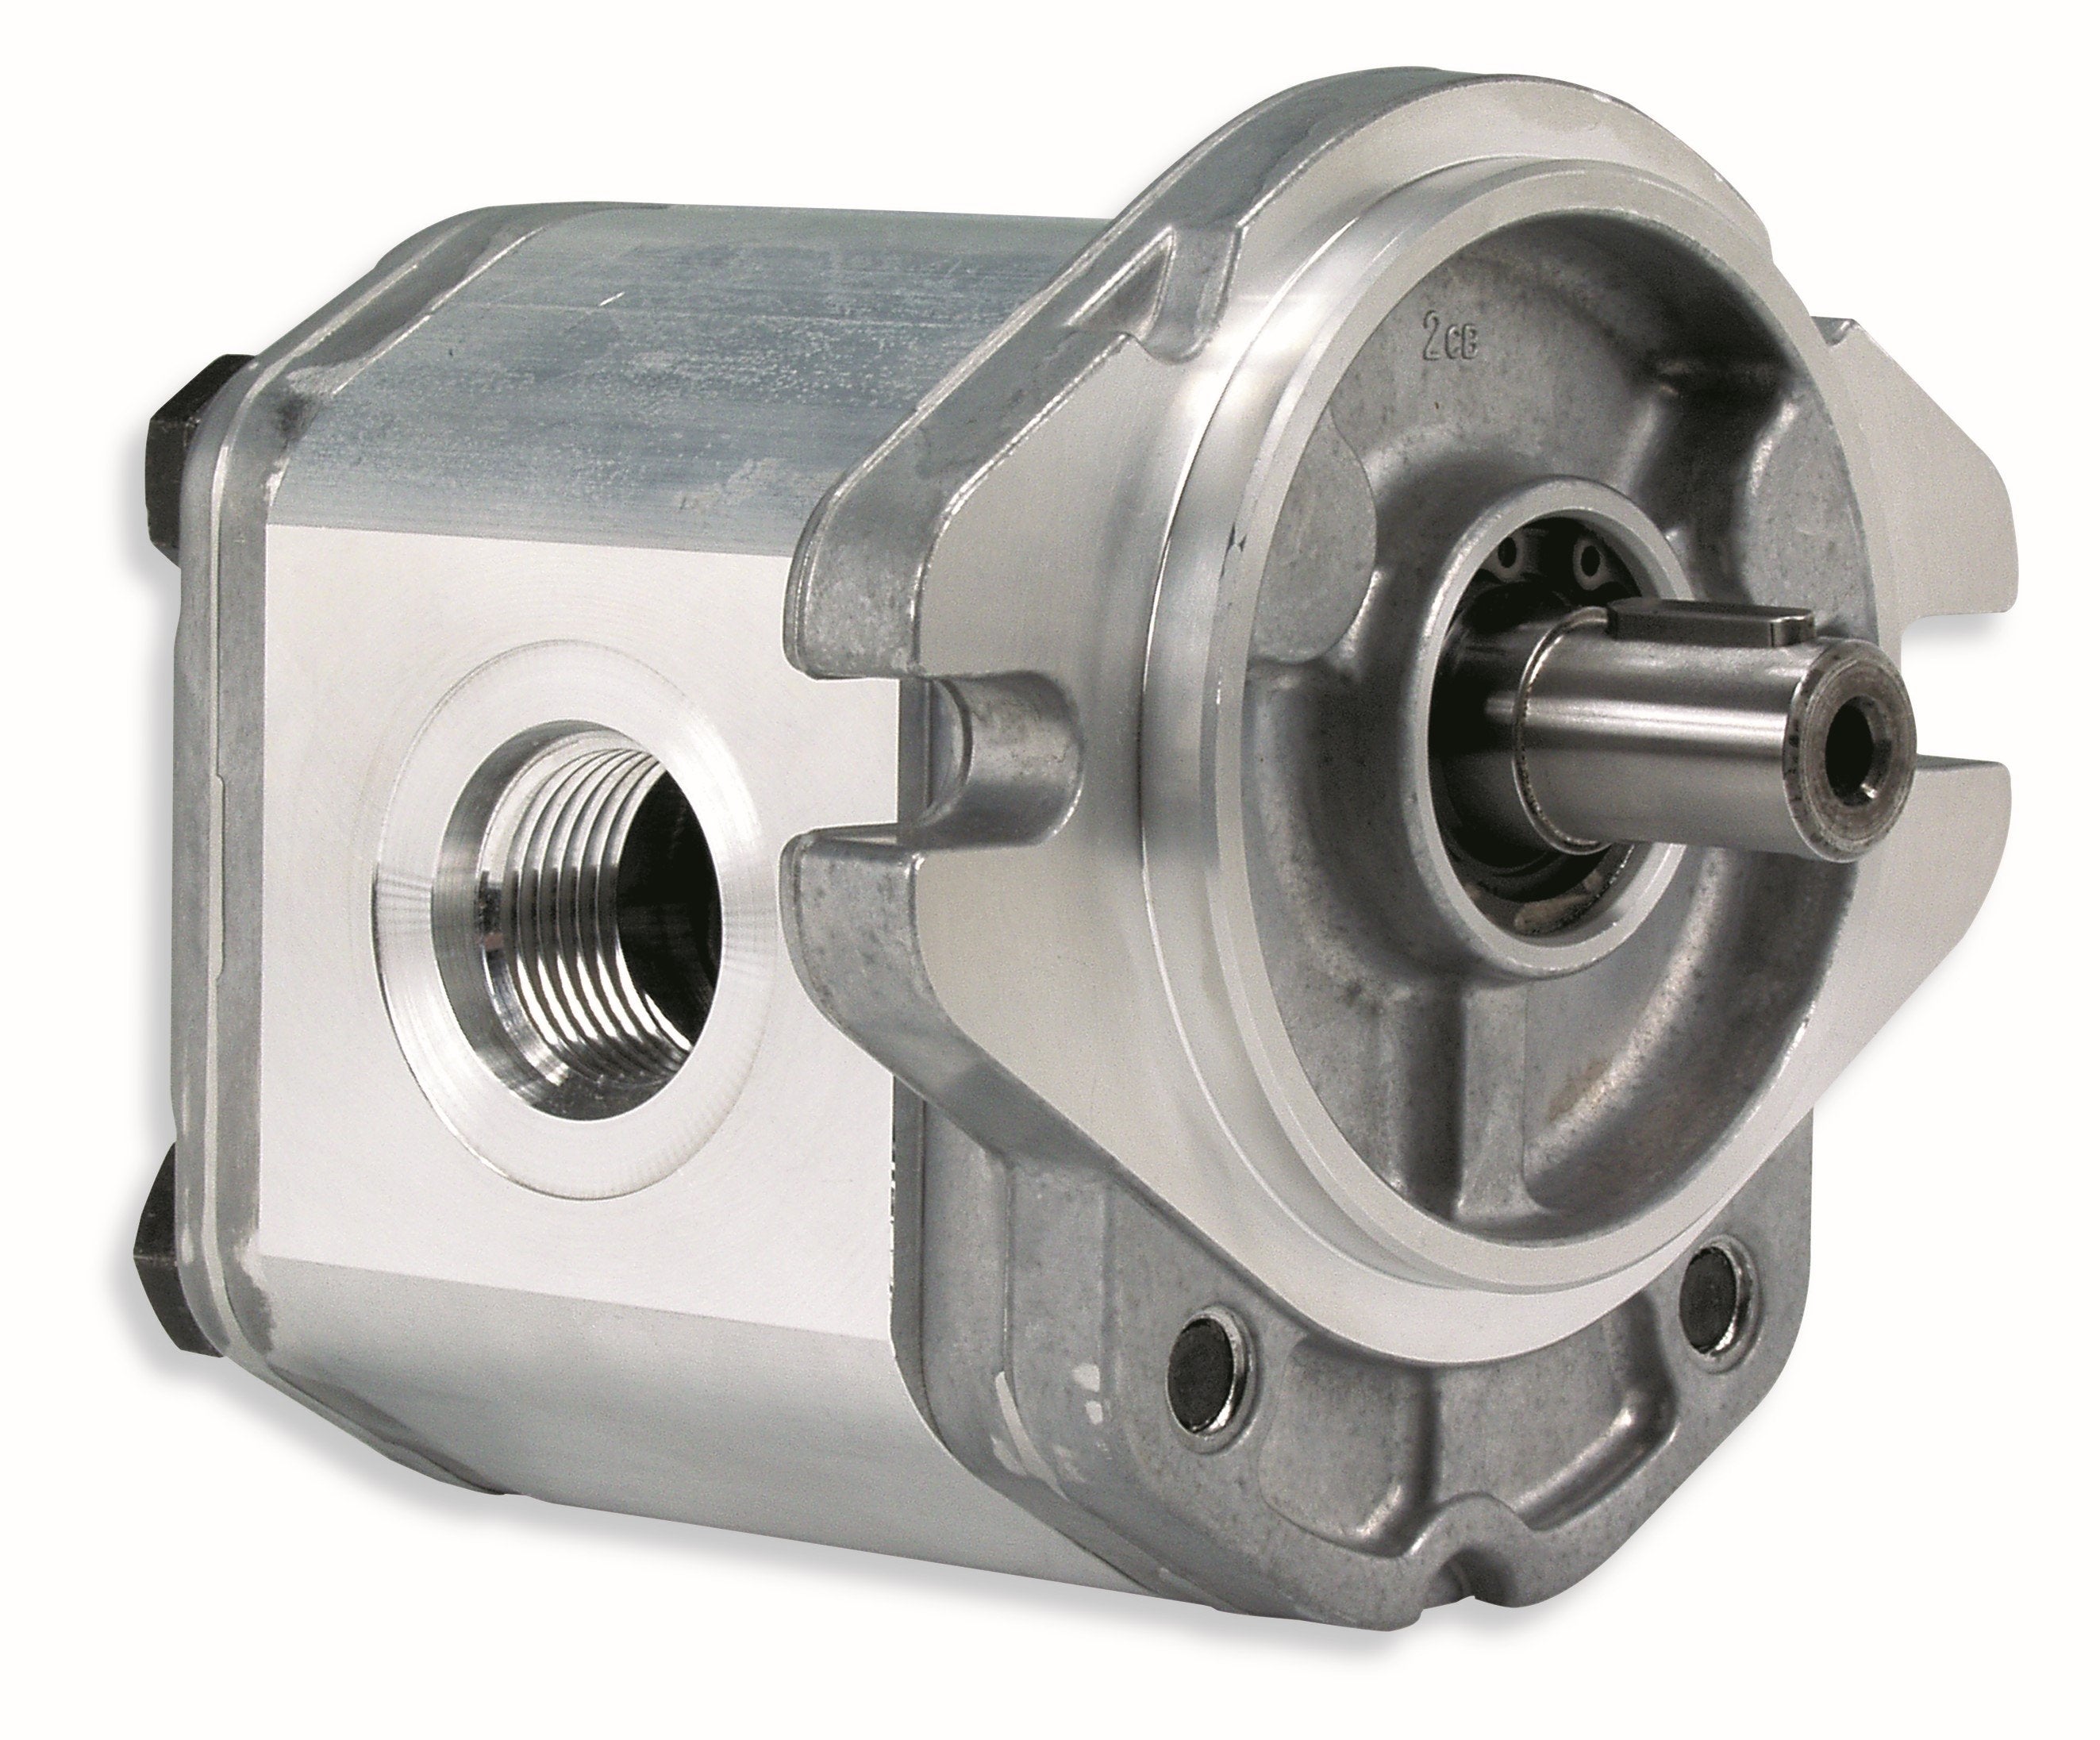 GHM2A-R-6-S1-E2 : Marzocchi Gear Motor, Bidirectional, 4.5cc, 4060psi rated, 4000RPM, 0.75 (3/4") #12 SAE ports, 9T 16/32DP Splined Shaft